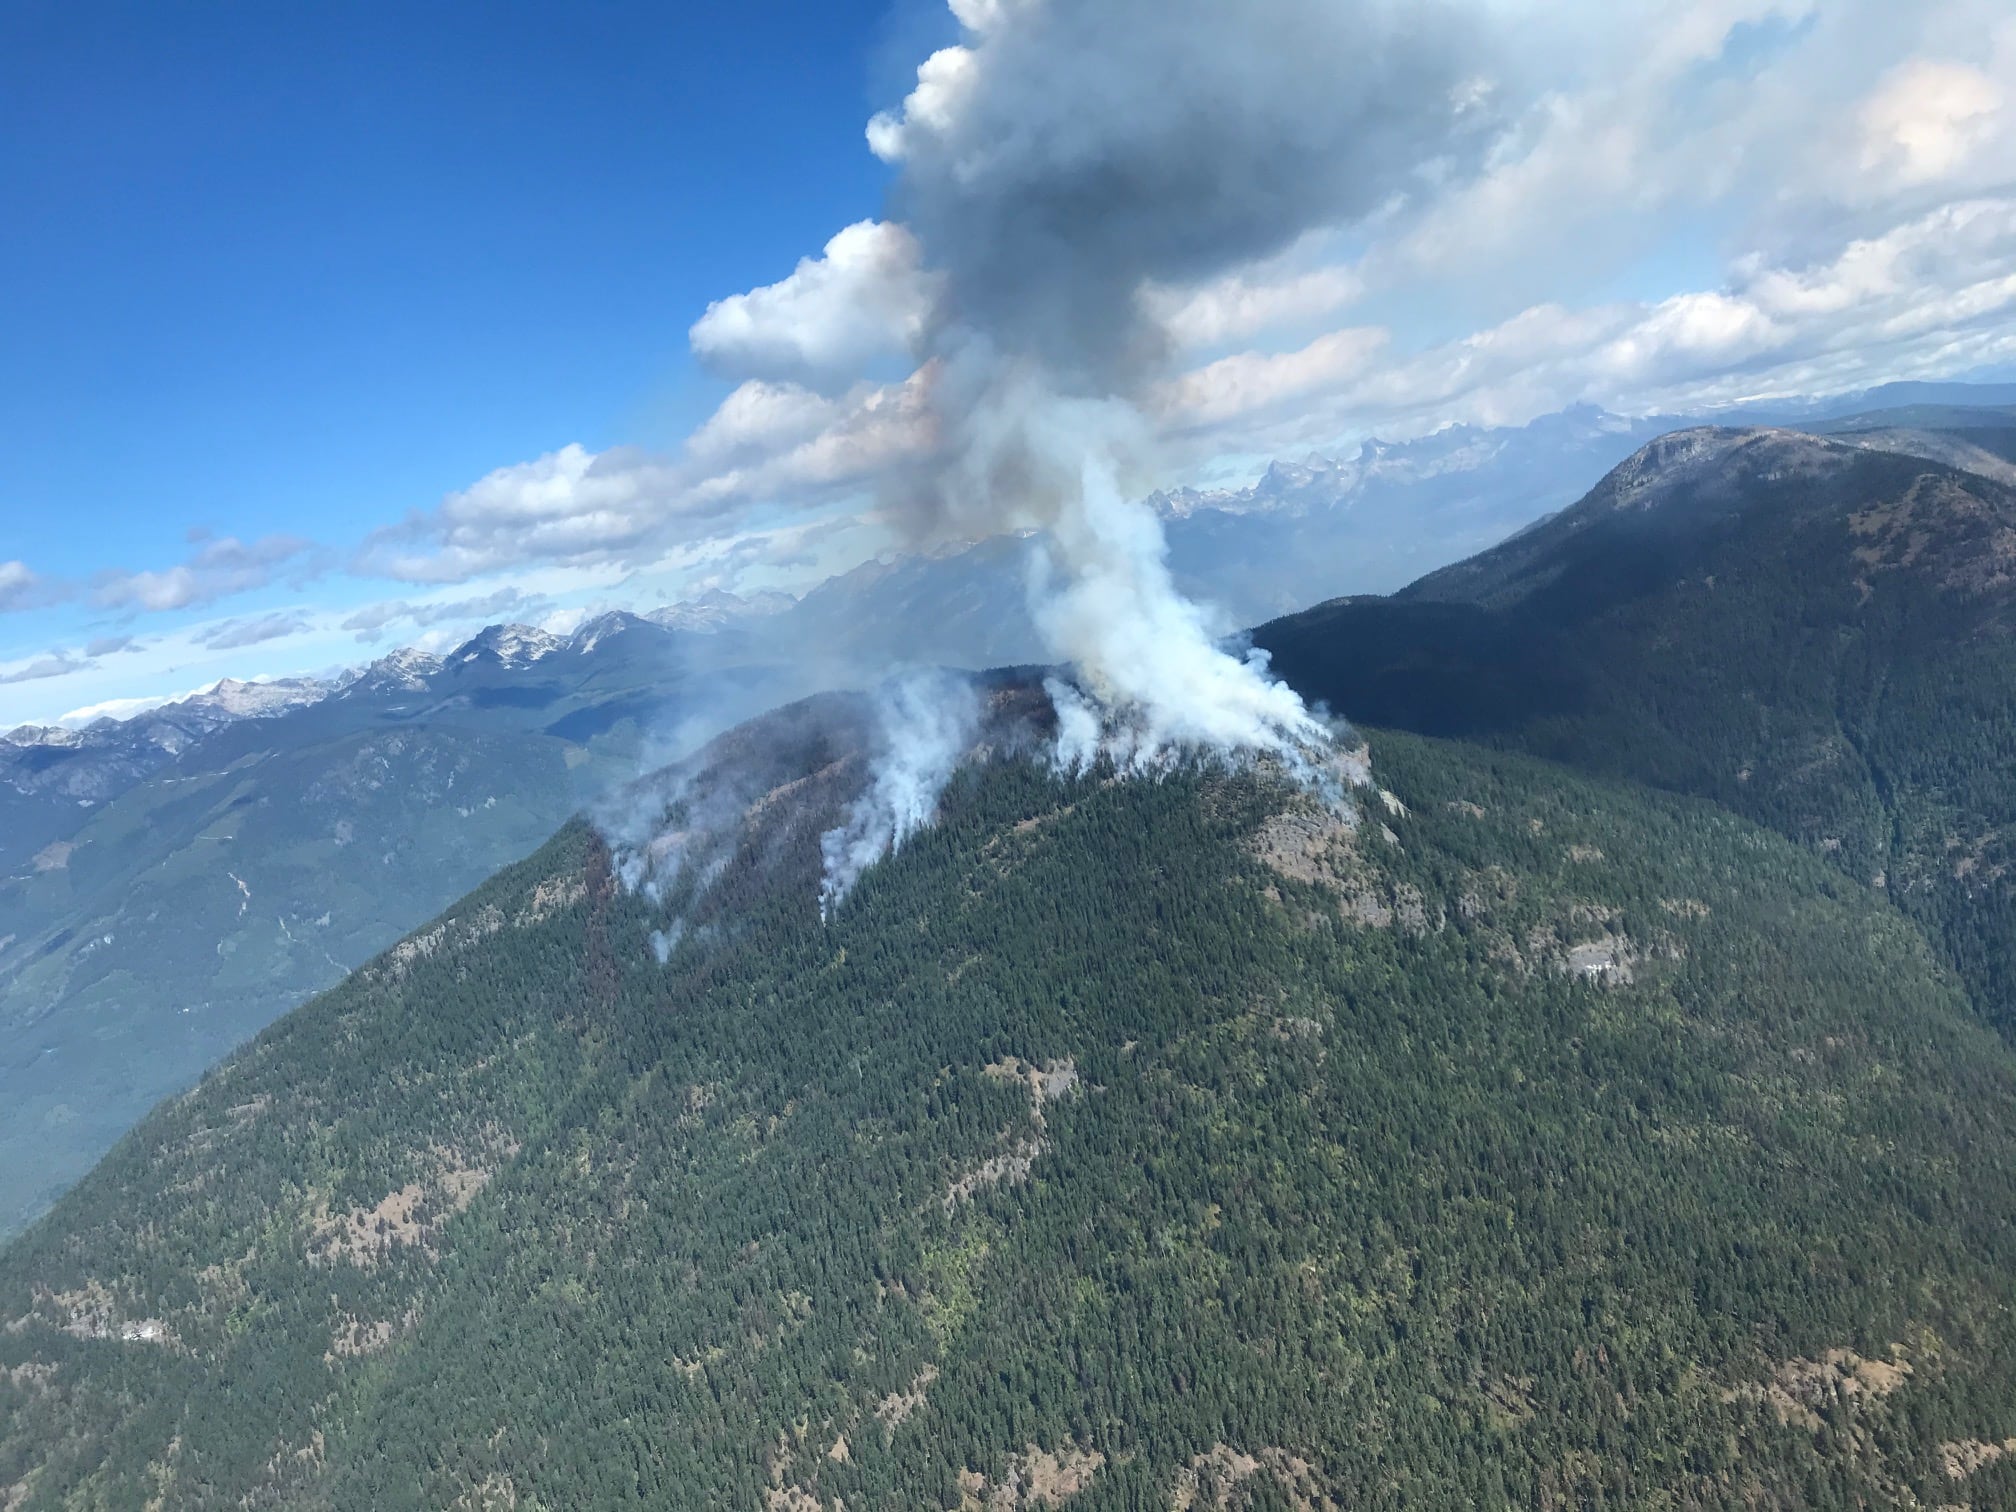 Talbot Creek fire remains out of control, now covers 725 hectares